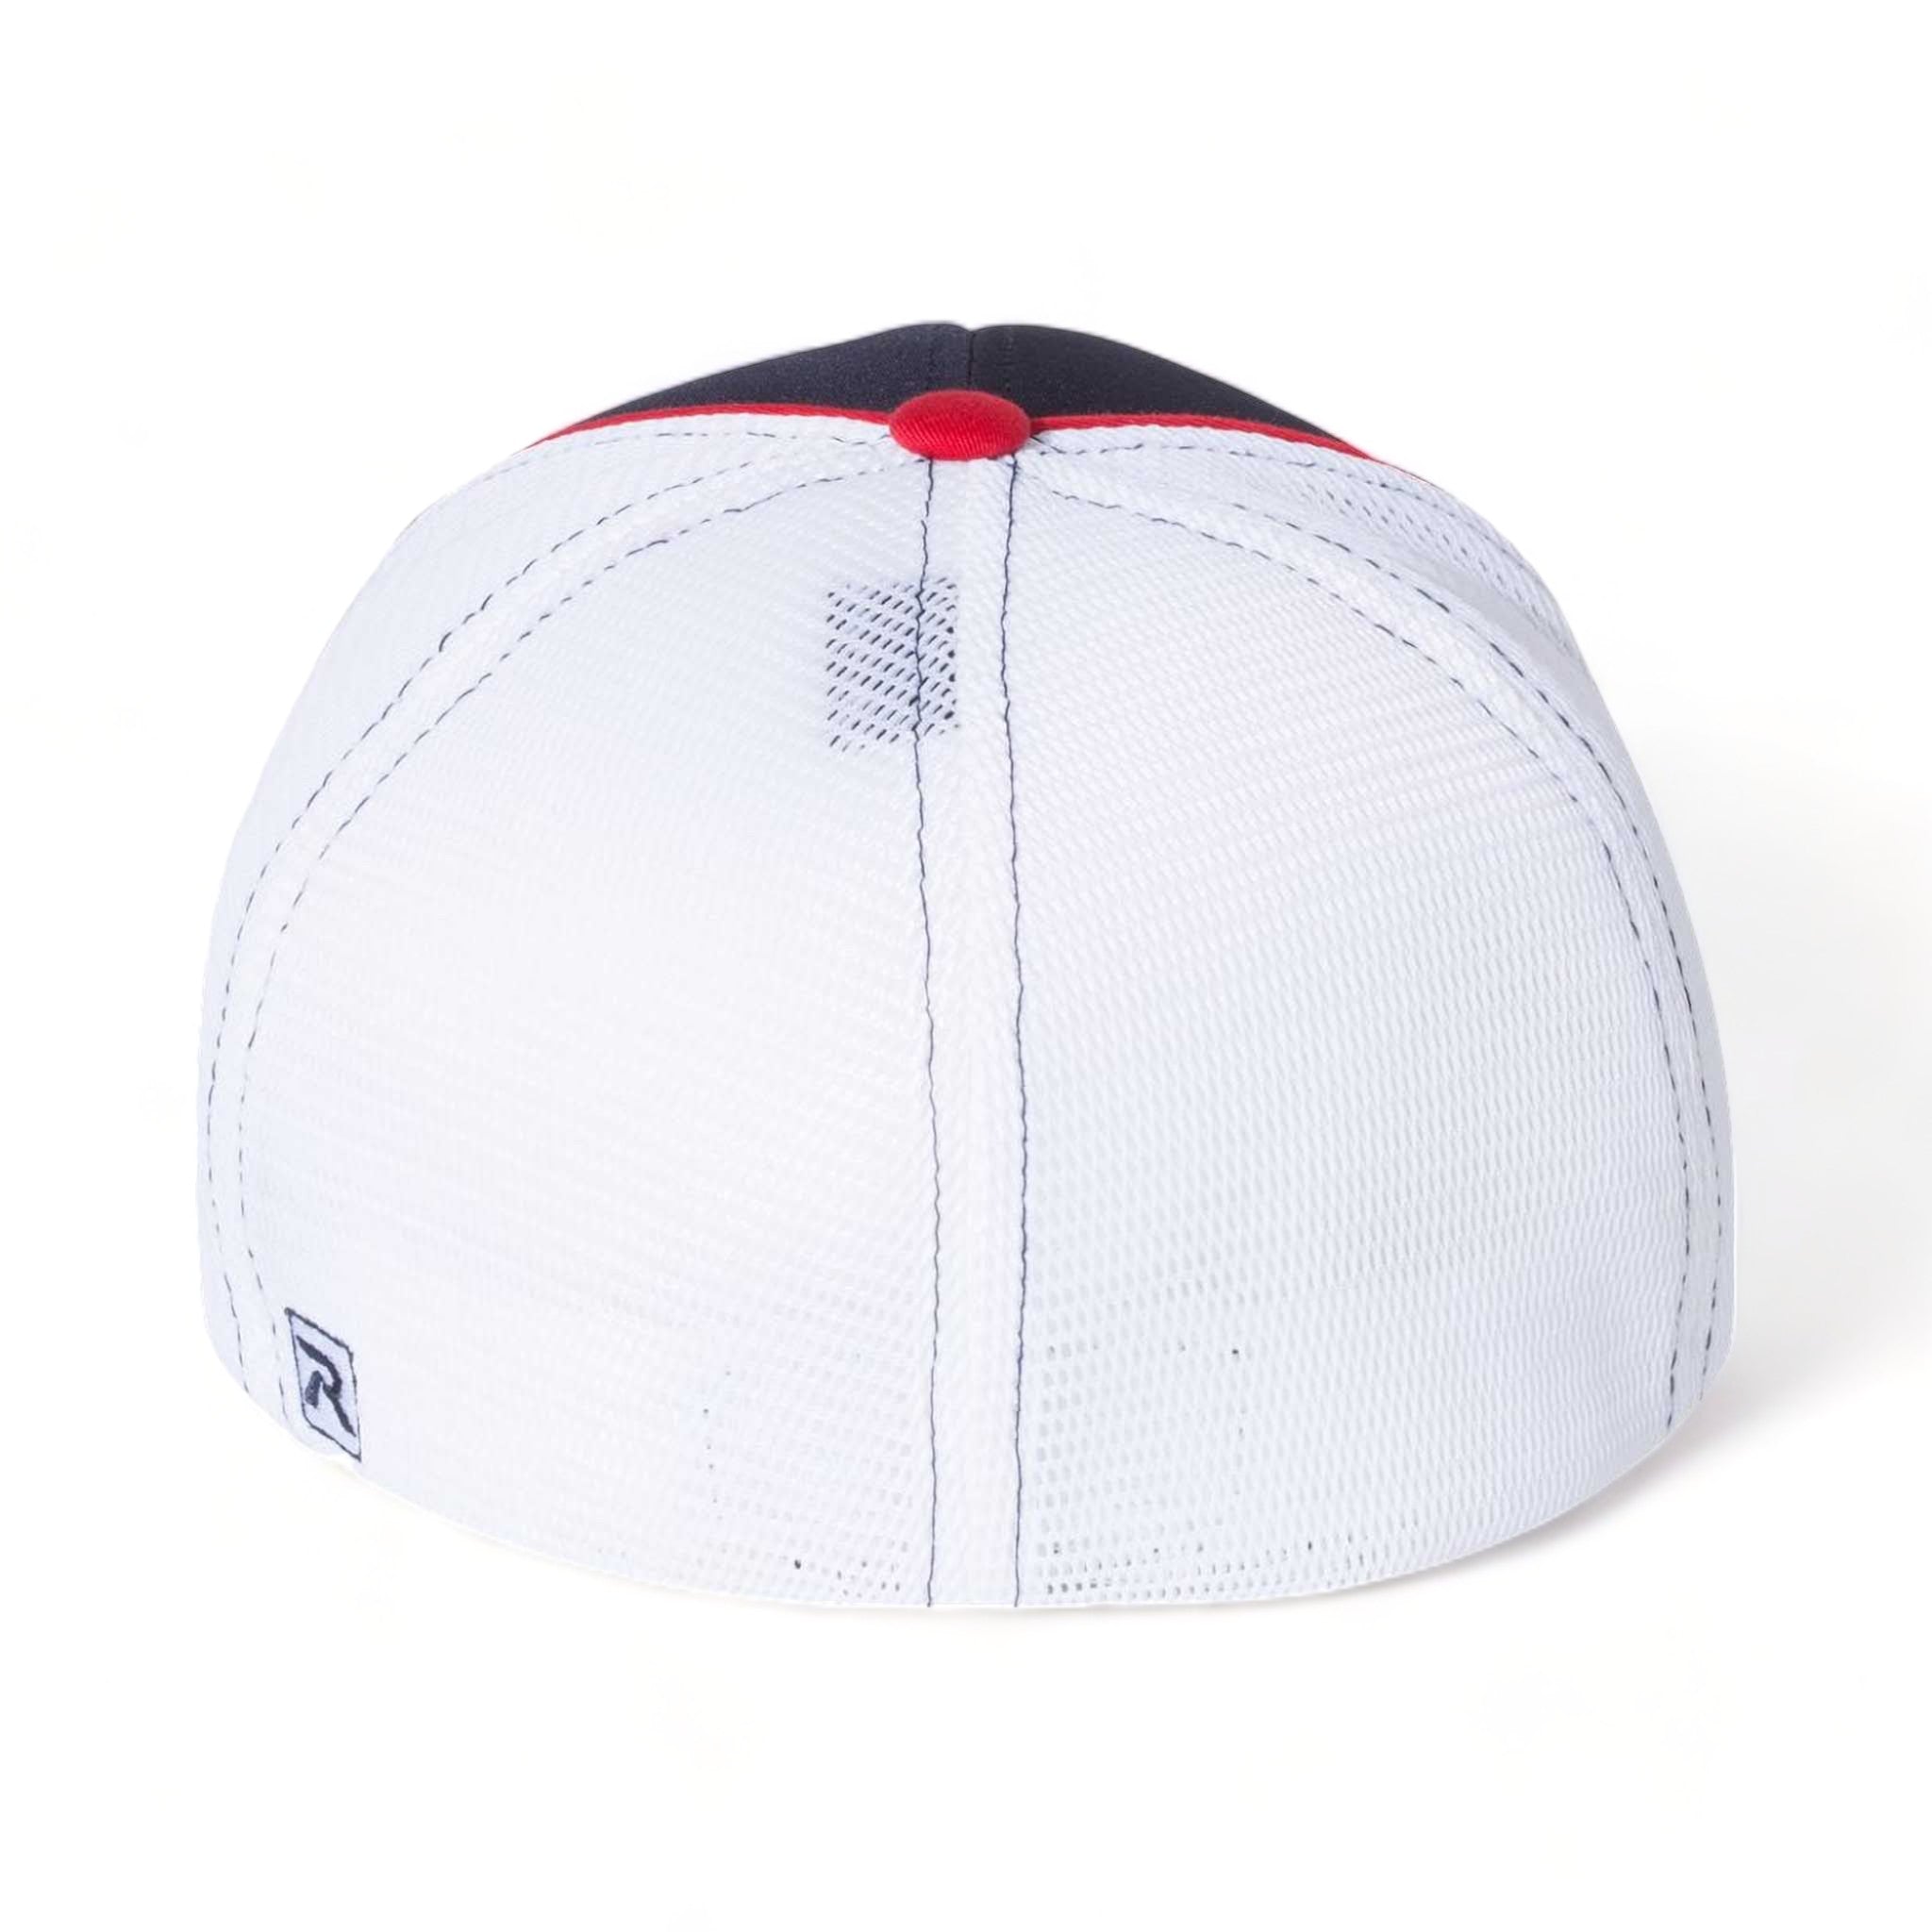 Back view of Richardson 172 custom hat in navy,  white and red tri